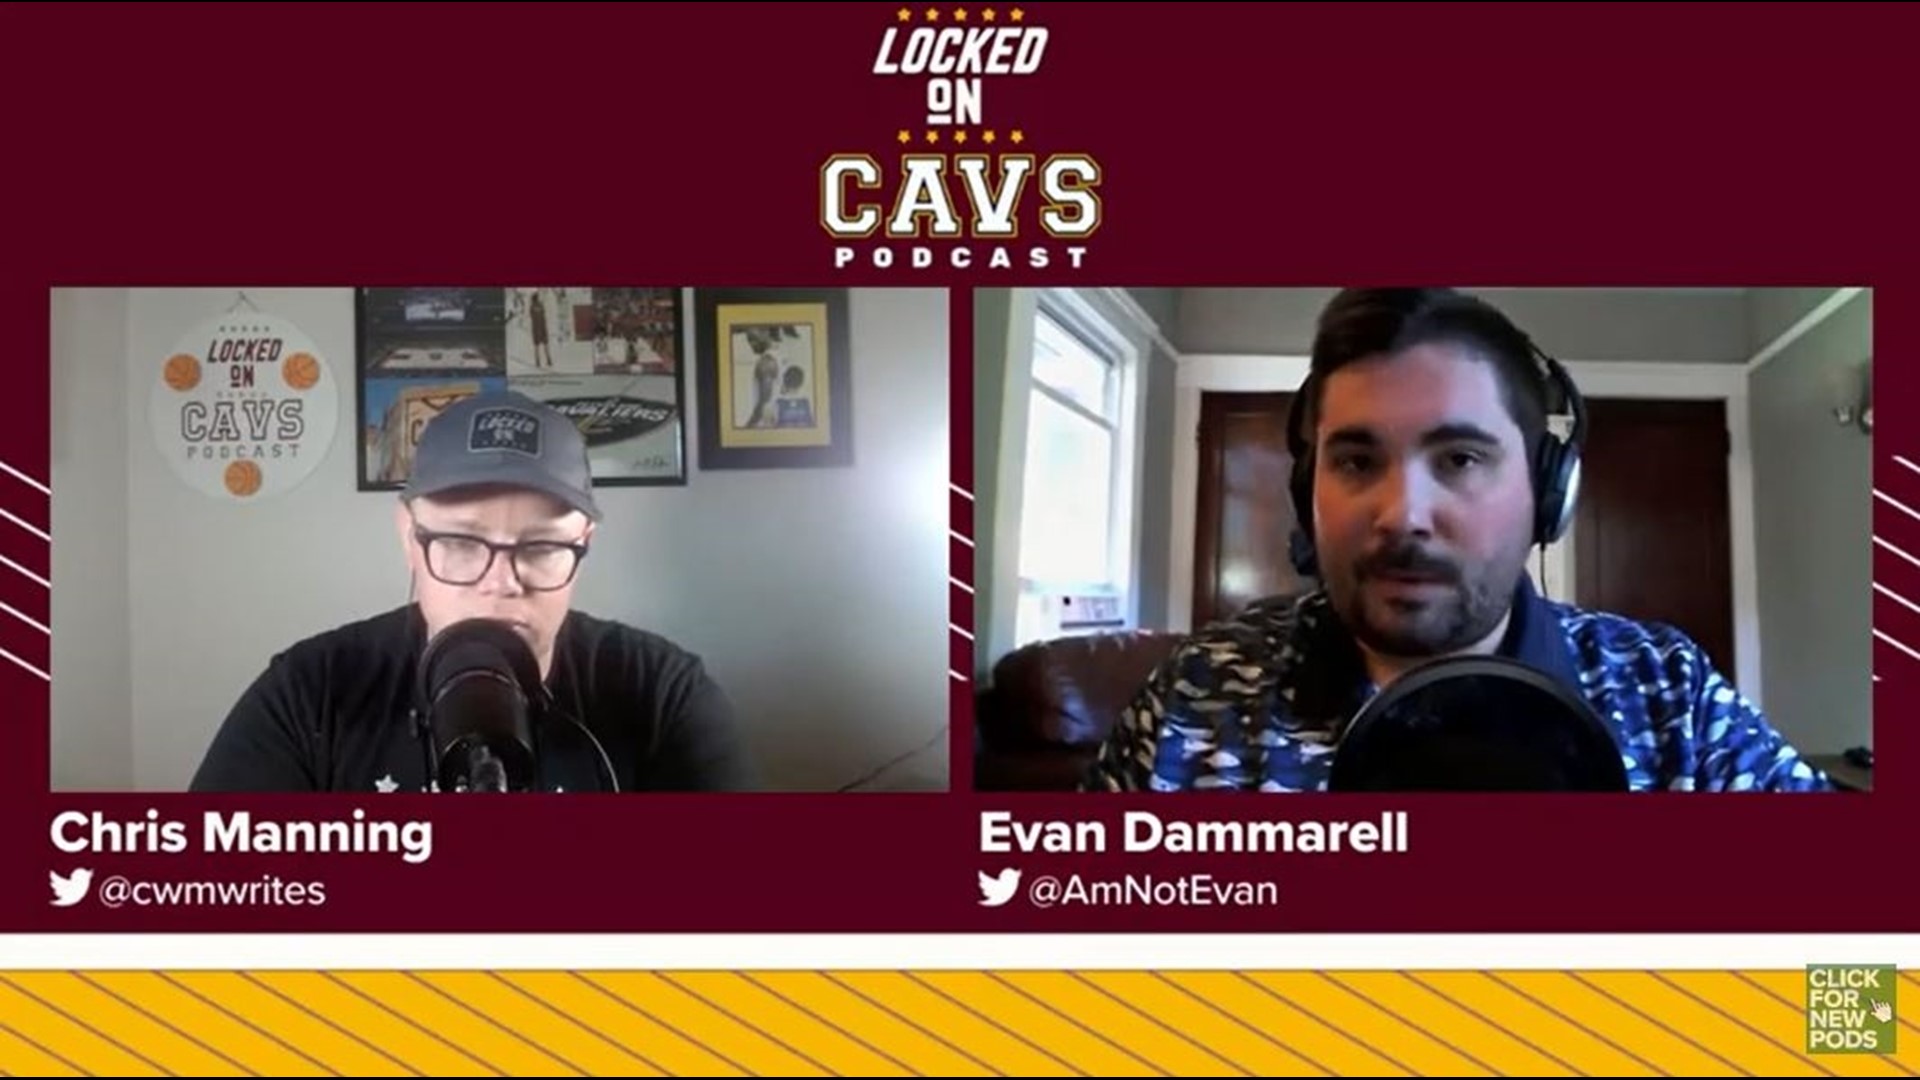 Chris Manning and Evan Dammarell react live to the early beginnings of NBA free agency, including where Kevin Durant may end up.